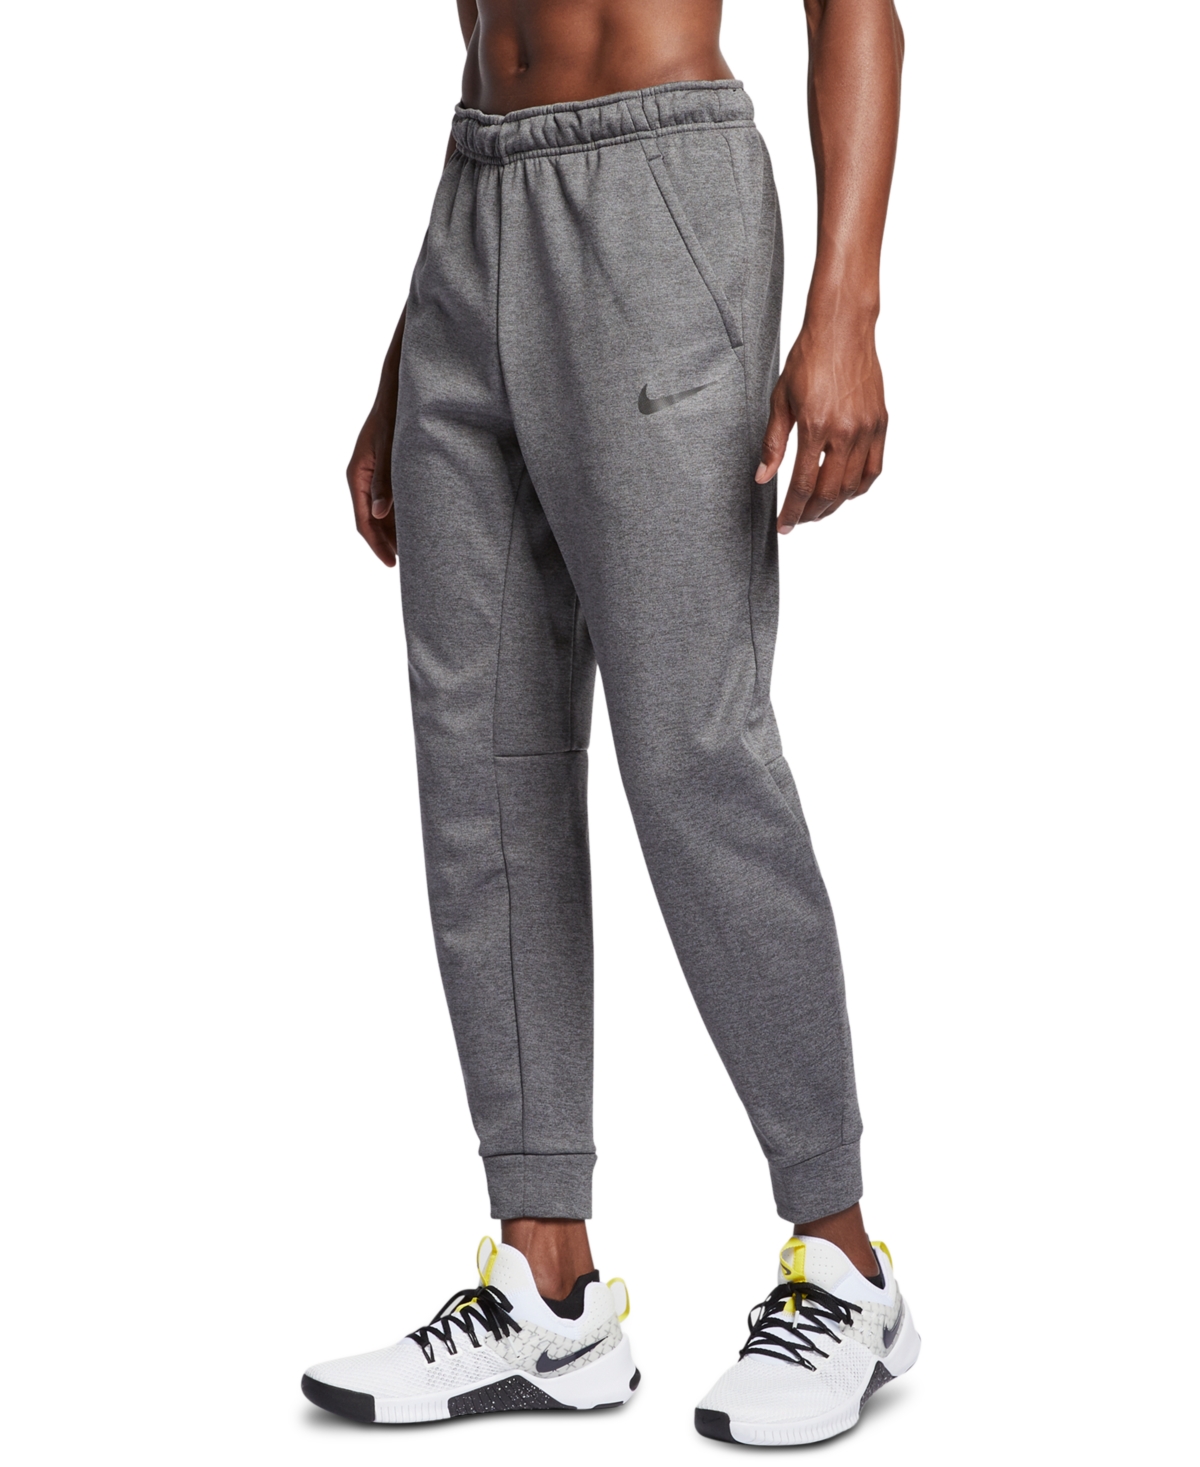 UPC 886668341286 product image for Nike Men's Therma Tapered Training Pants | upcitemdb.com